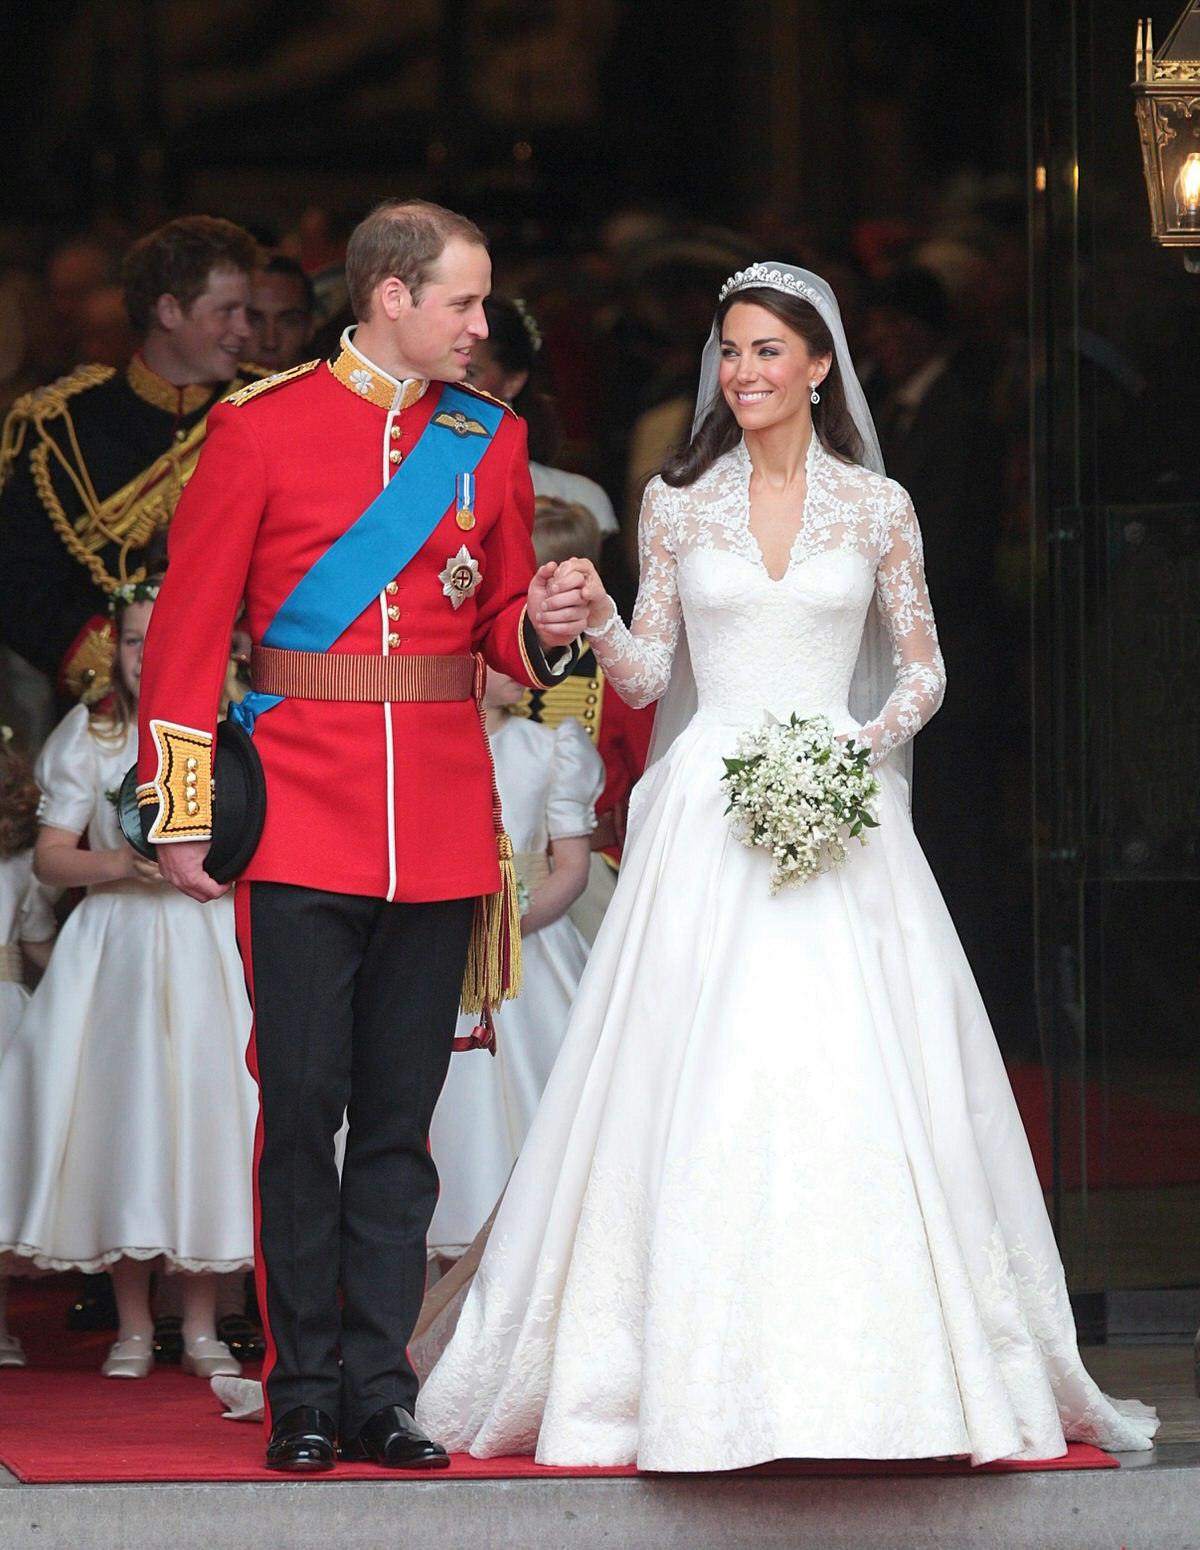 Prince William adorned in his ceremonial military uniform (bright red jacket, with embroidered gold lapels and blue sash, atop black trousers) smiles and holds the hand of Catherine who is wearing a beautiful white wedding dress with lace shoulders; a royal wedding to remember © Lewis Whyld / PA Images / Getty Images